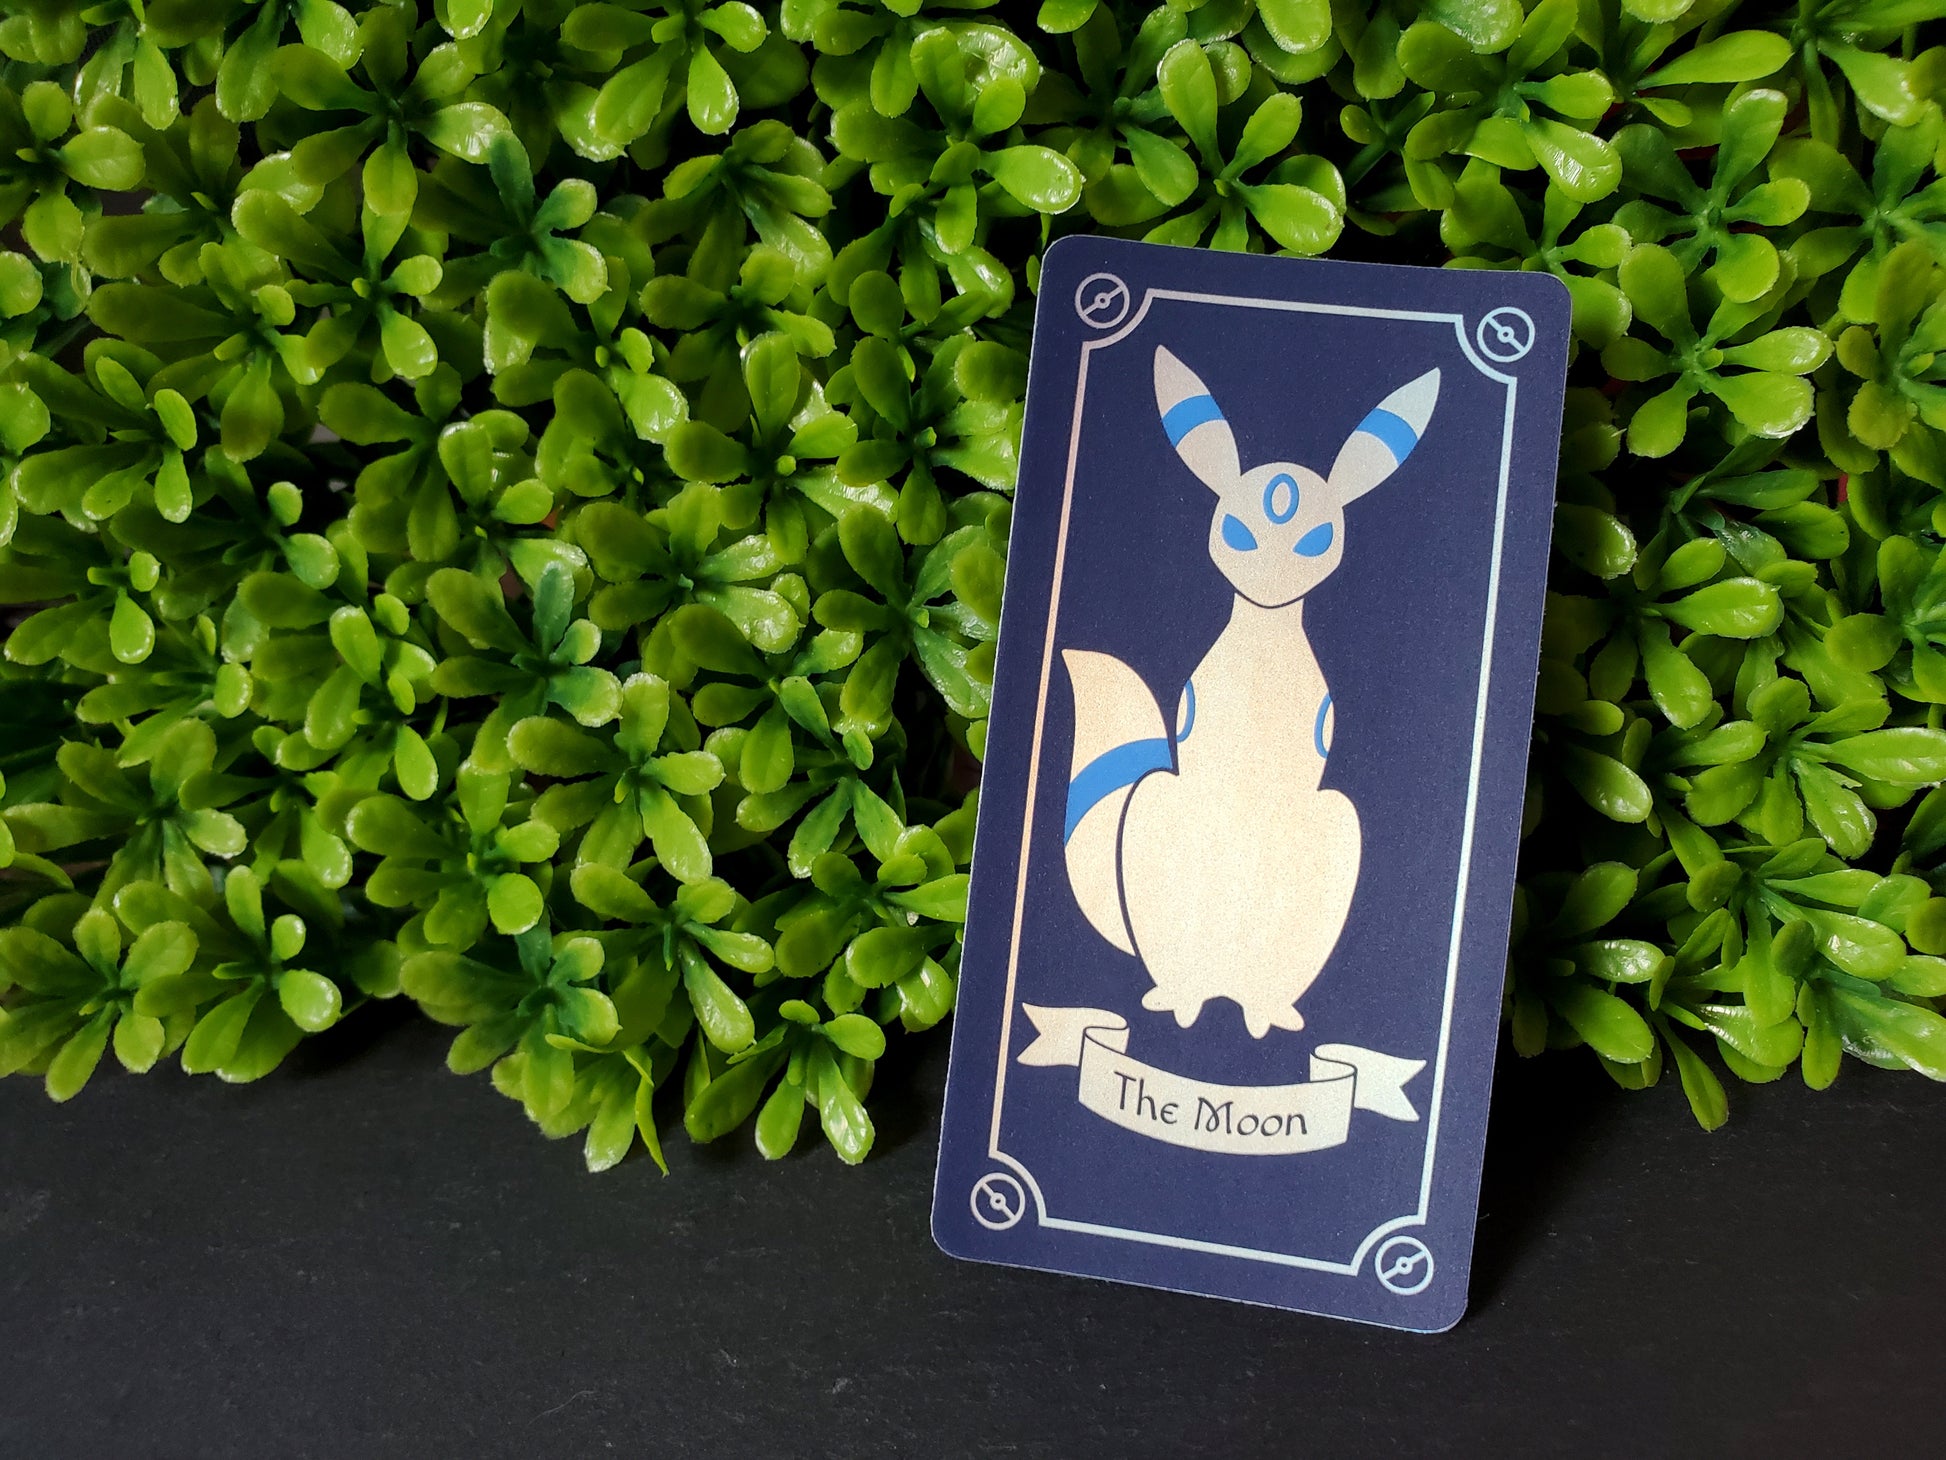 Umbreon Tarot Card Inspired Sticker - The Moon - Blue sticker with holographic vaporwave shimmer